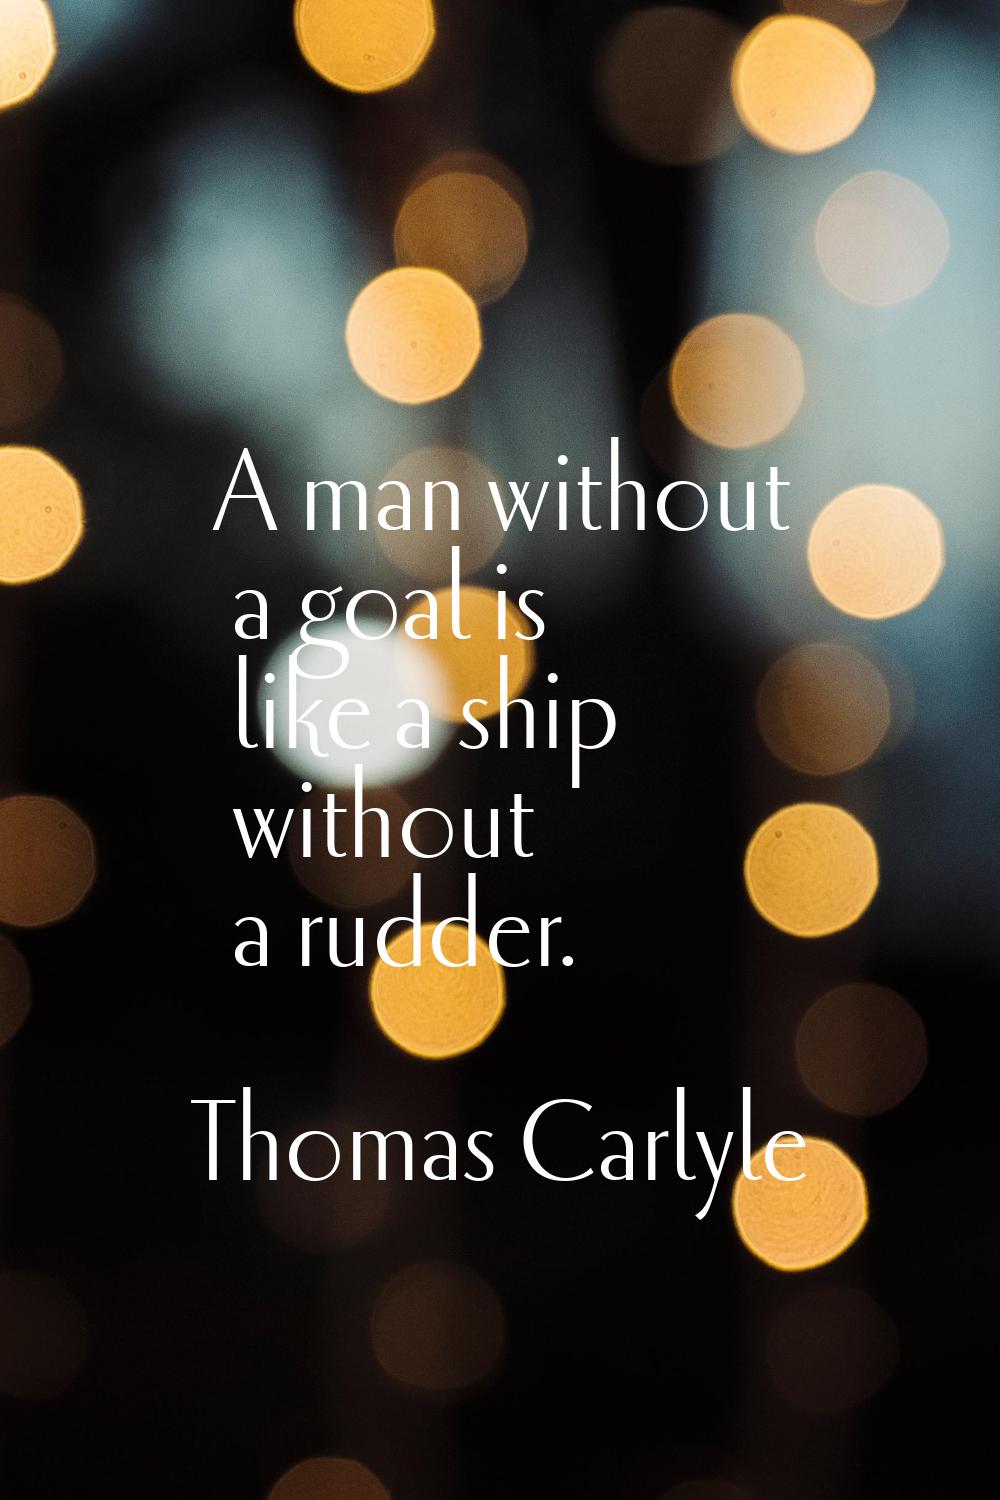 A man without a goal is like a ship without a rudder.